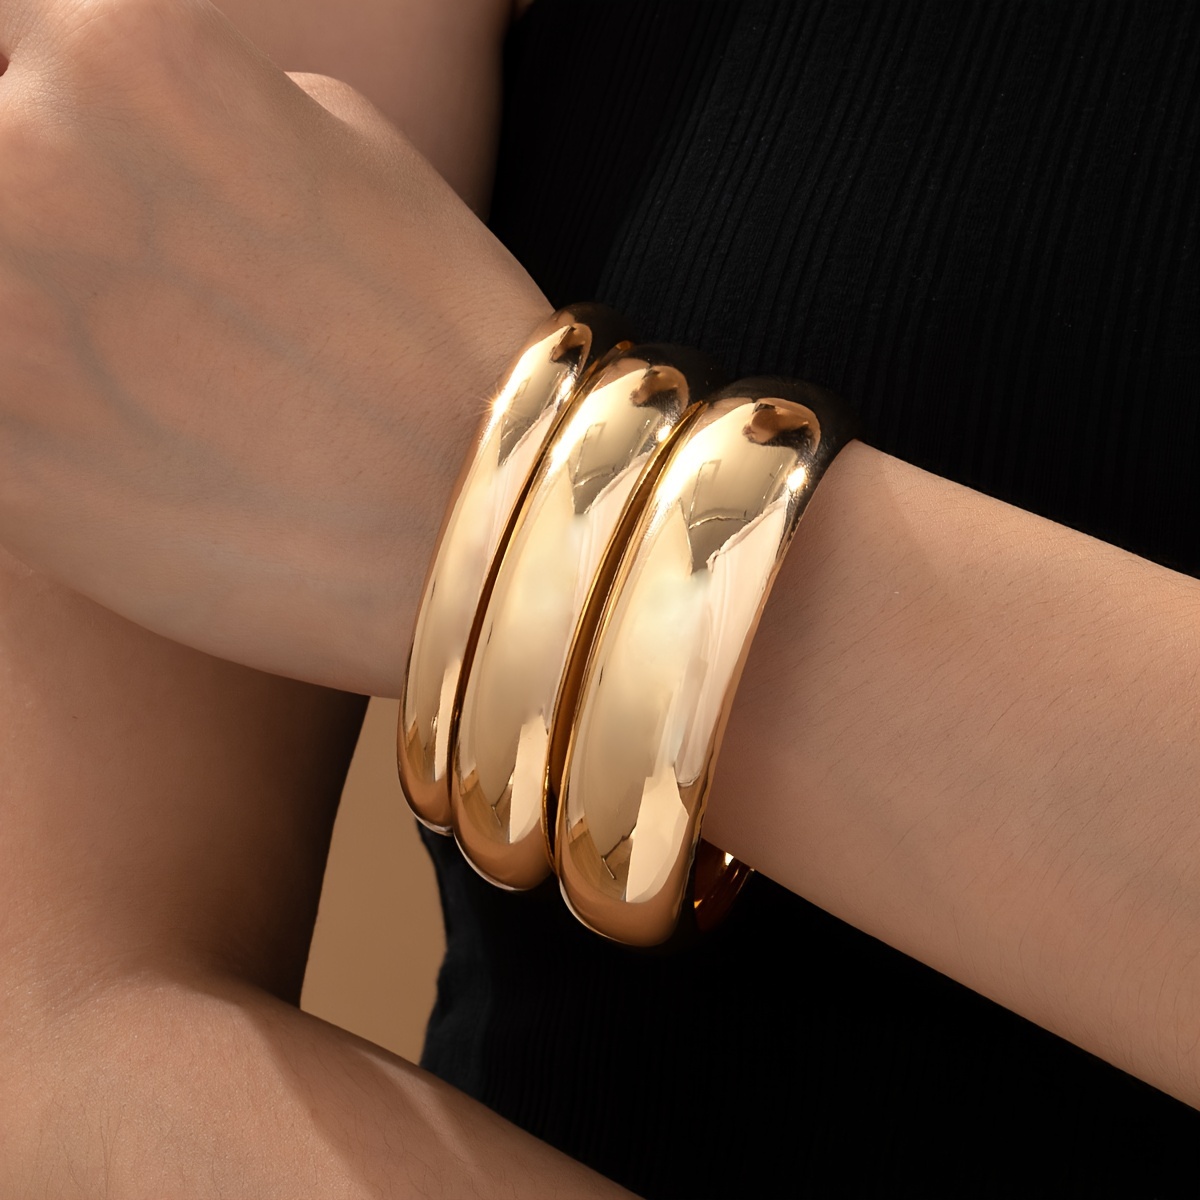 

3-piece Elegant Polished Bangles, Retro & Classic Design, Women's Chic Jewelry Accessory, Match Daily Outfits, Party Decor